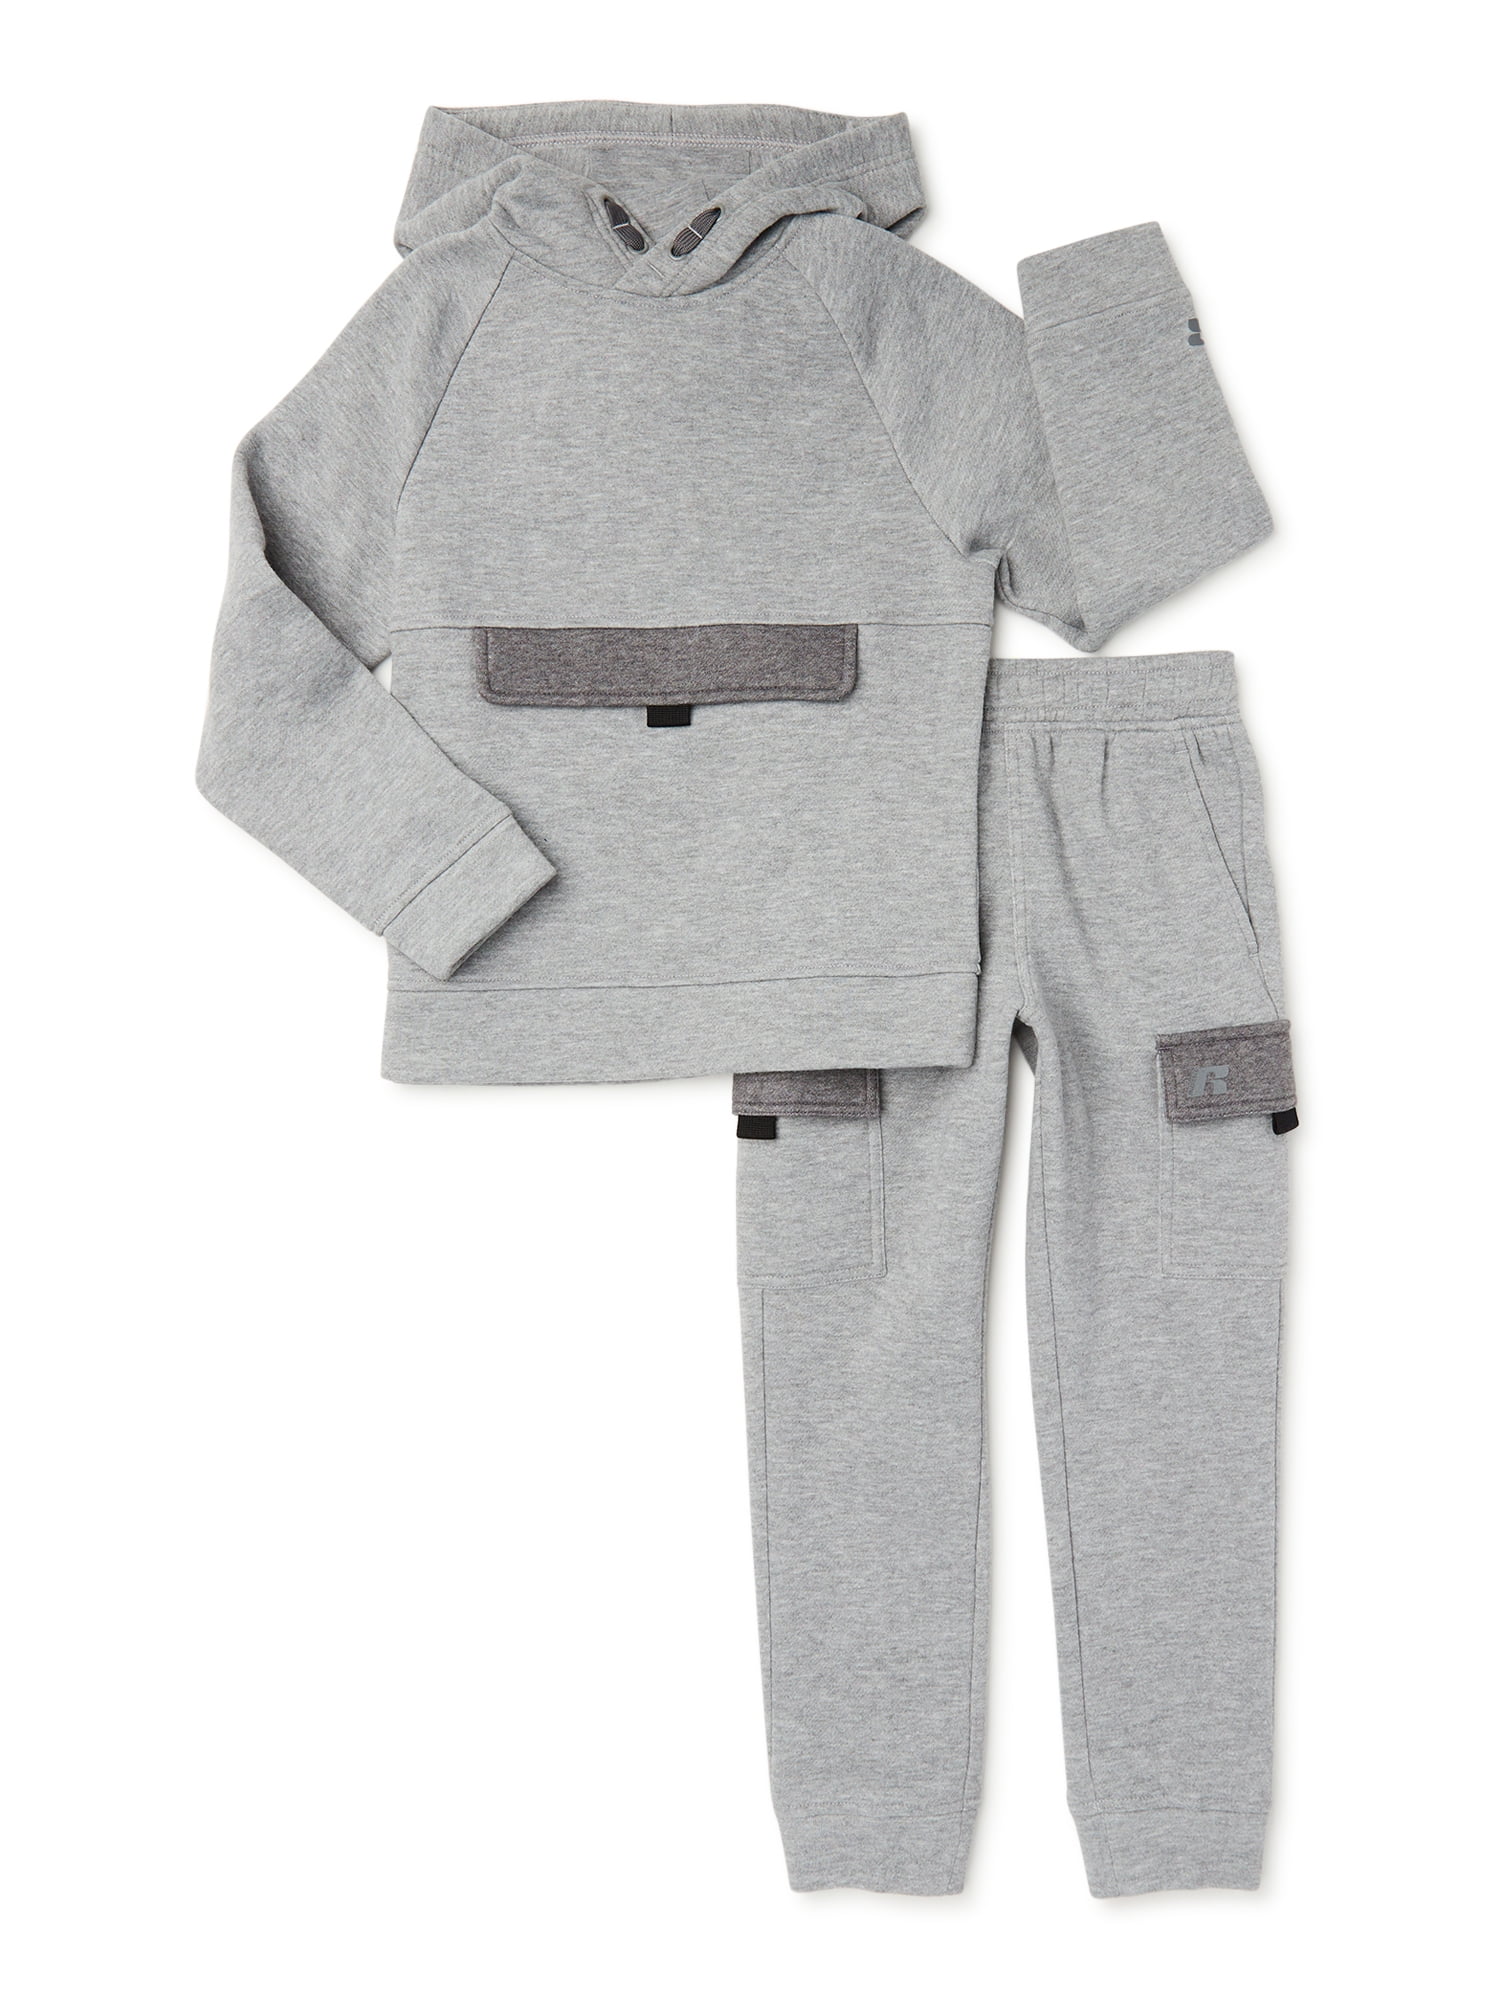 Russell Boys Fleece Hoodie and Cargo Jogger Pant 2-Piece Set, Sizes 4 ...